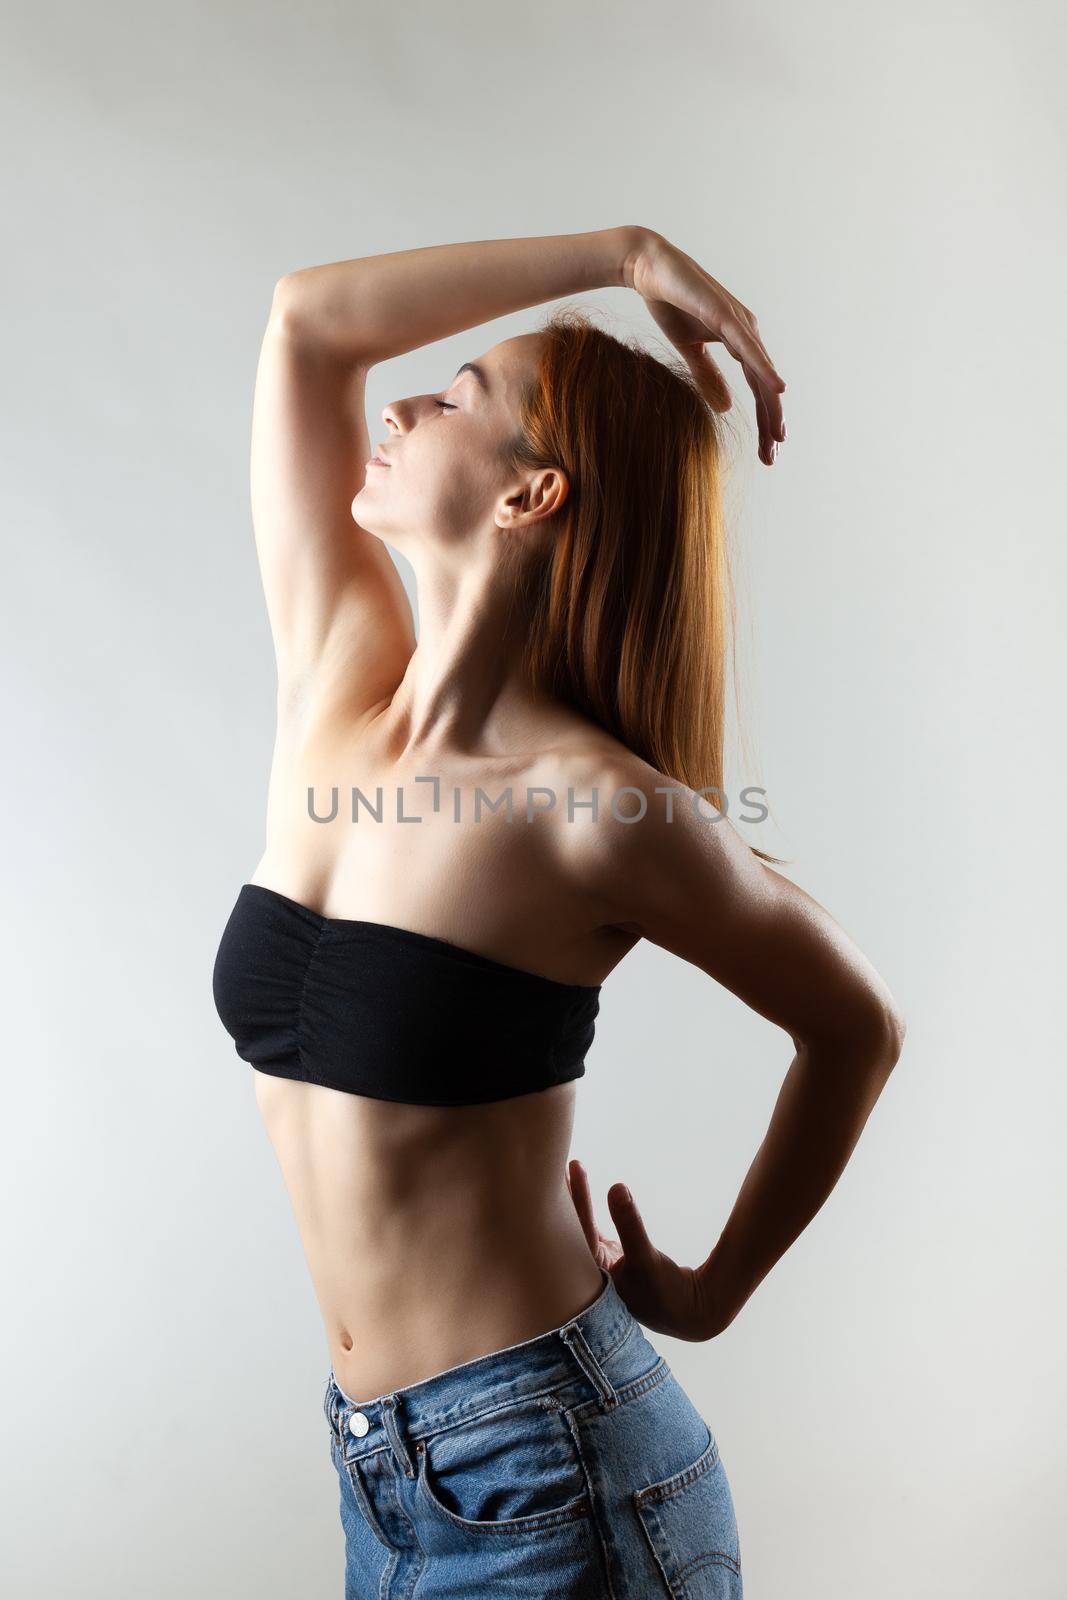 Beautiful girl with burnt orange hair stretching and making ballet pose. Studio portrait on gray background.